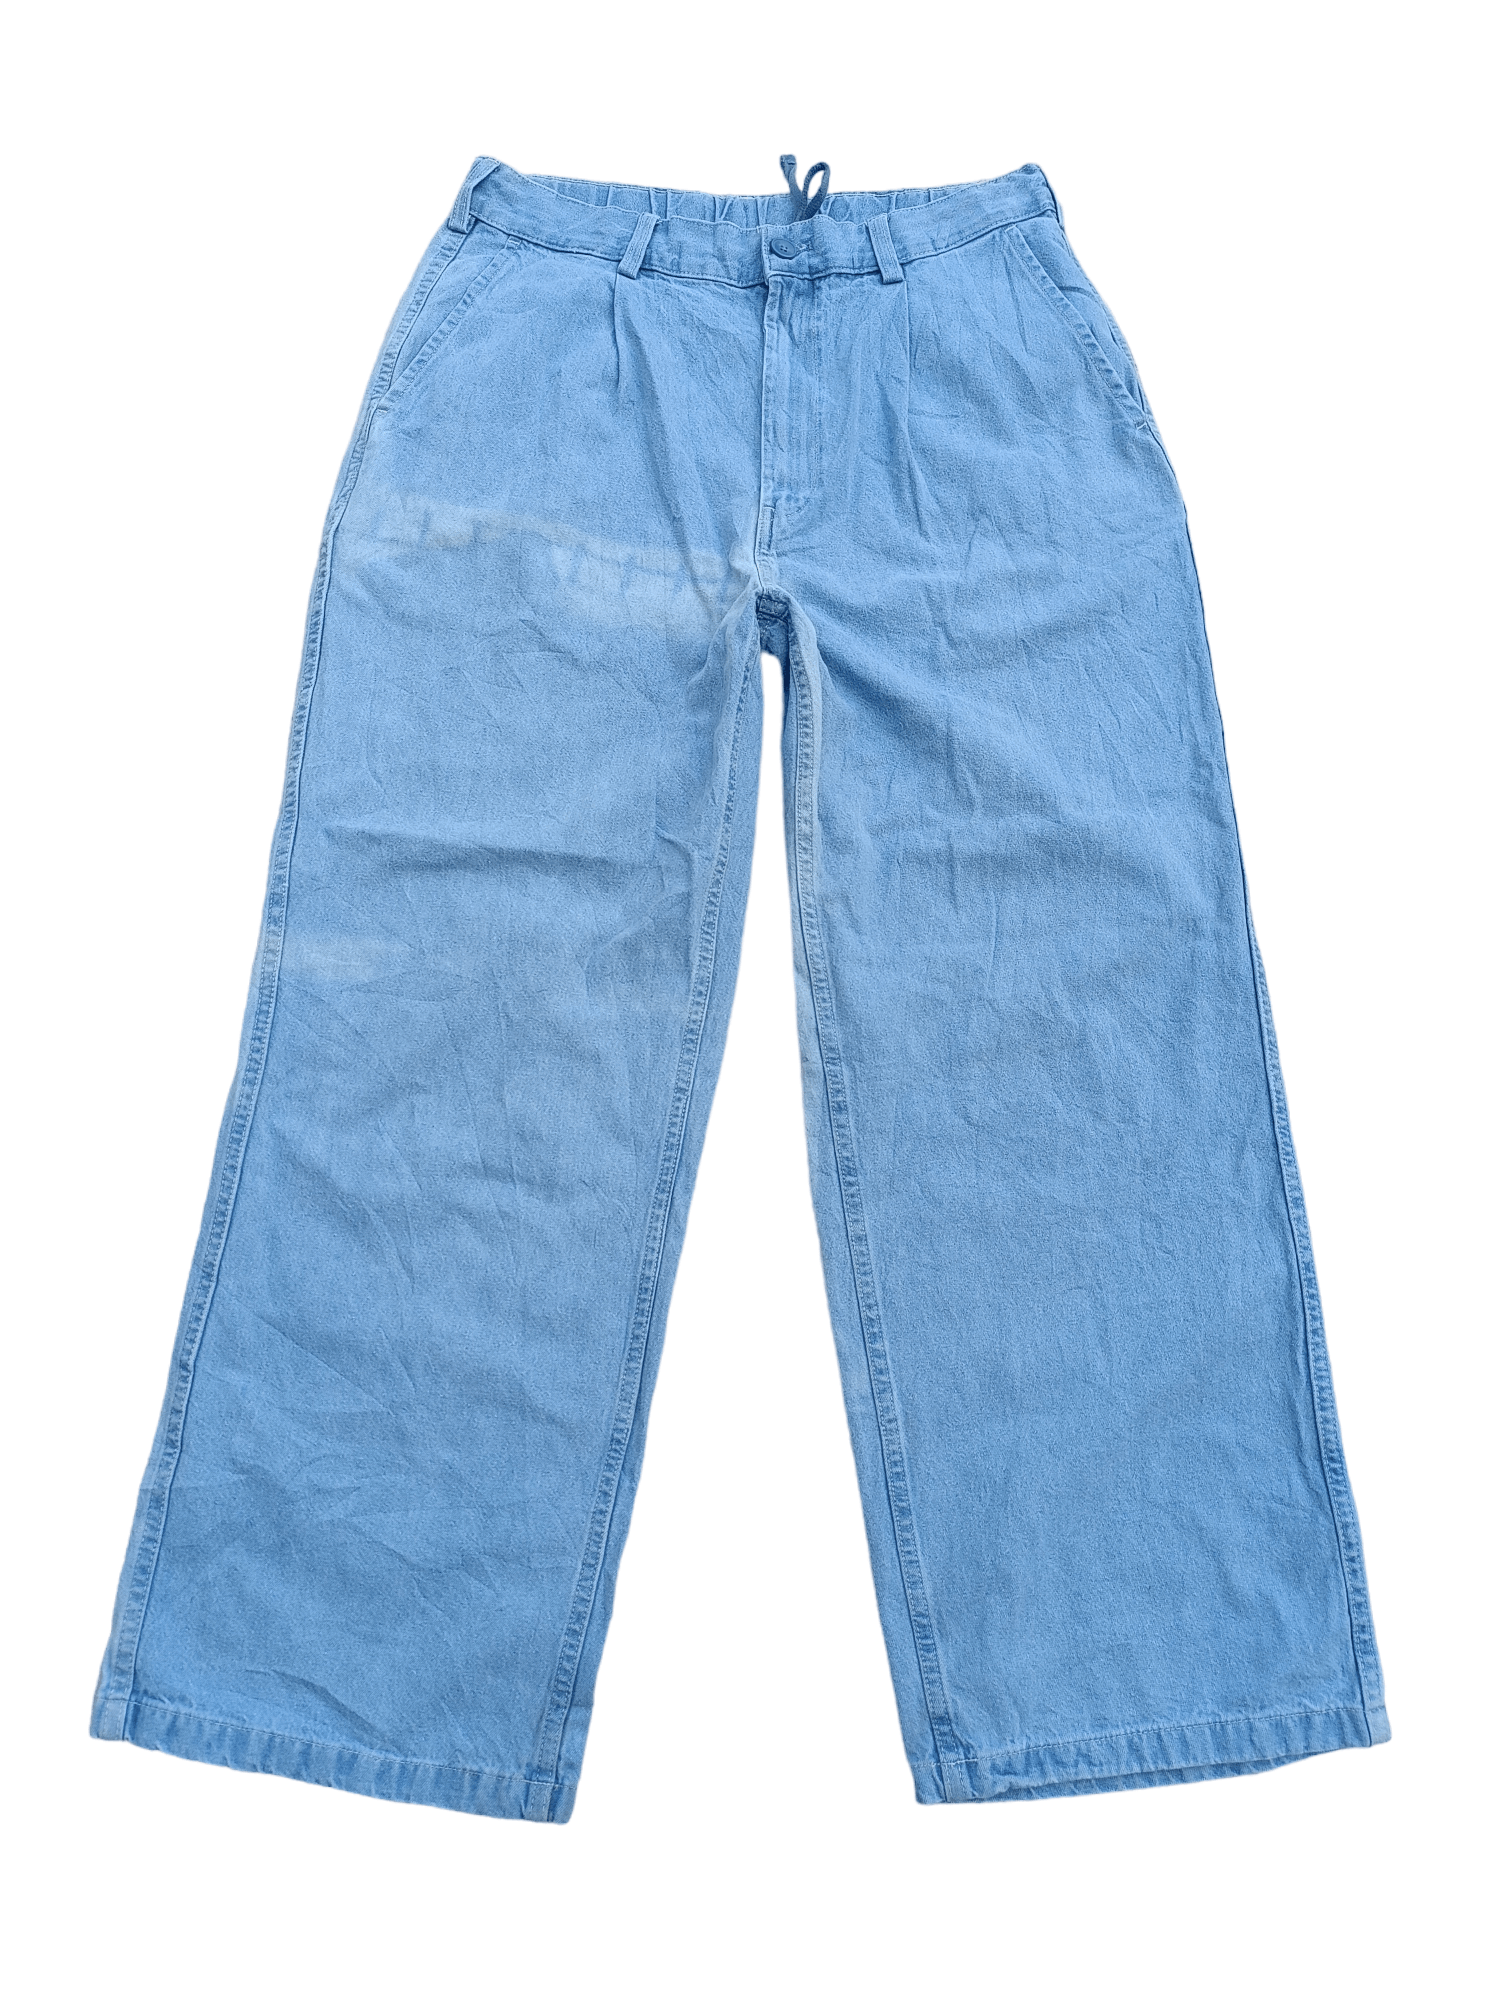 Japanese Brand Vintage Japanese Gu Baggy Style Flare Jeans 30x30 Size US 32 / EU 48 - 1 Preview